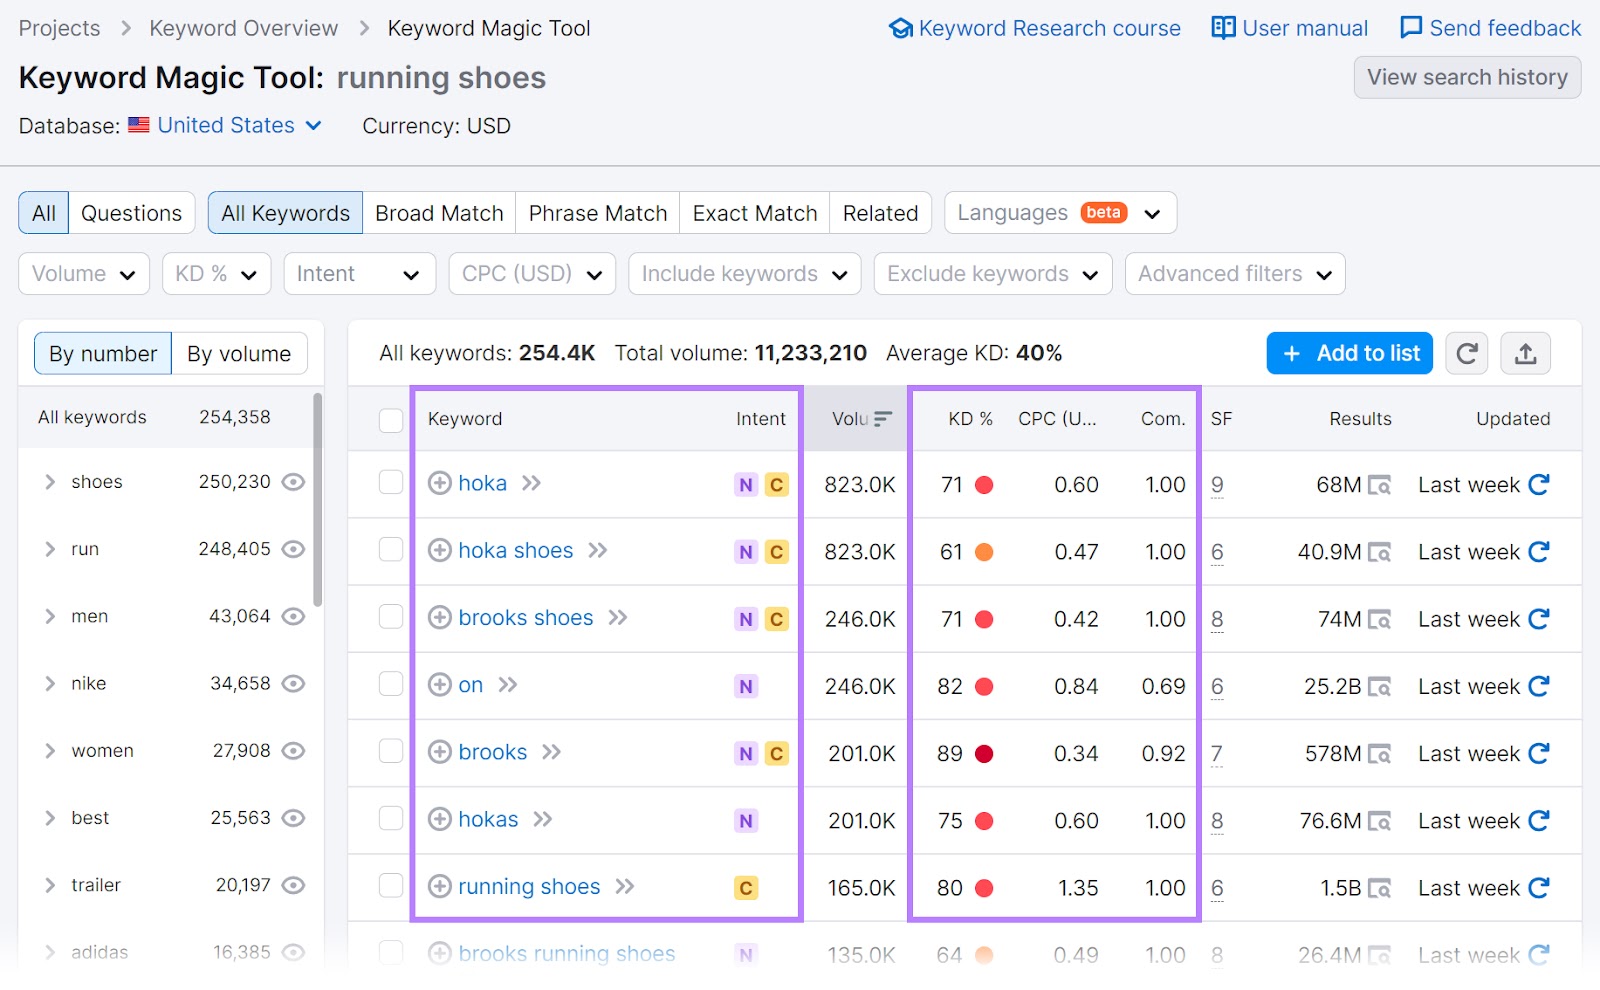 Keyword Magic Tool results for "running shoes"